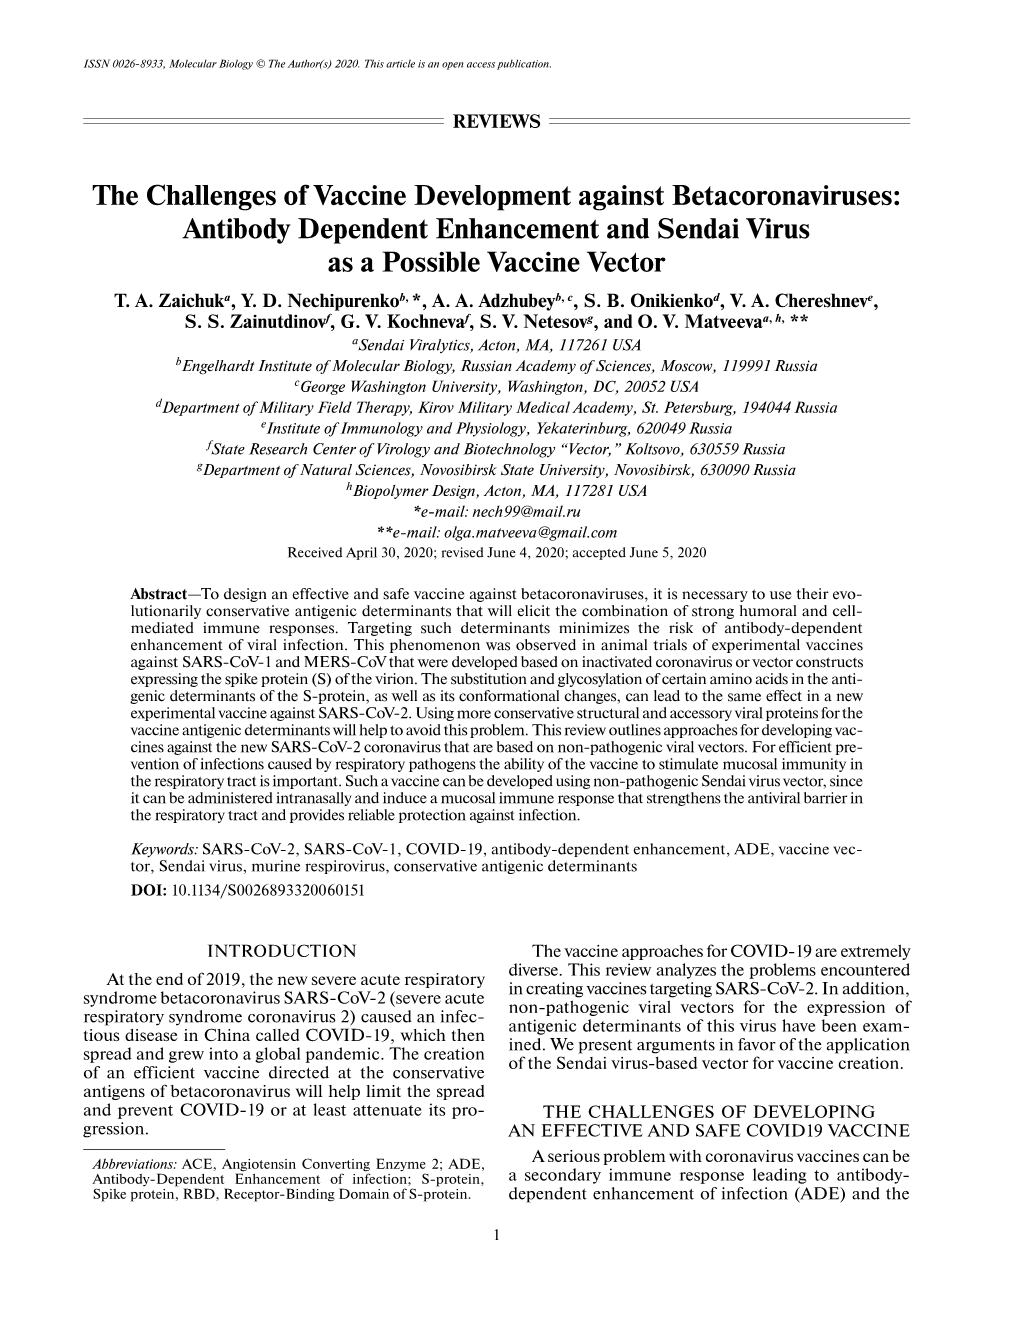 The Challenges of Vaccine Development Against Betacoronaviruses: Antibody Dependent Enhancement and Sendai Virus As a Possible Vaccine Vector T